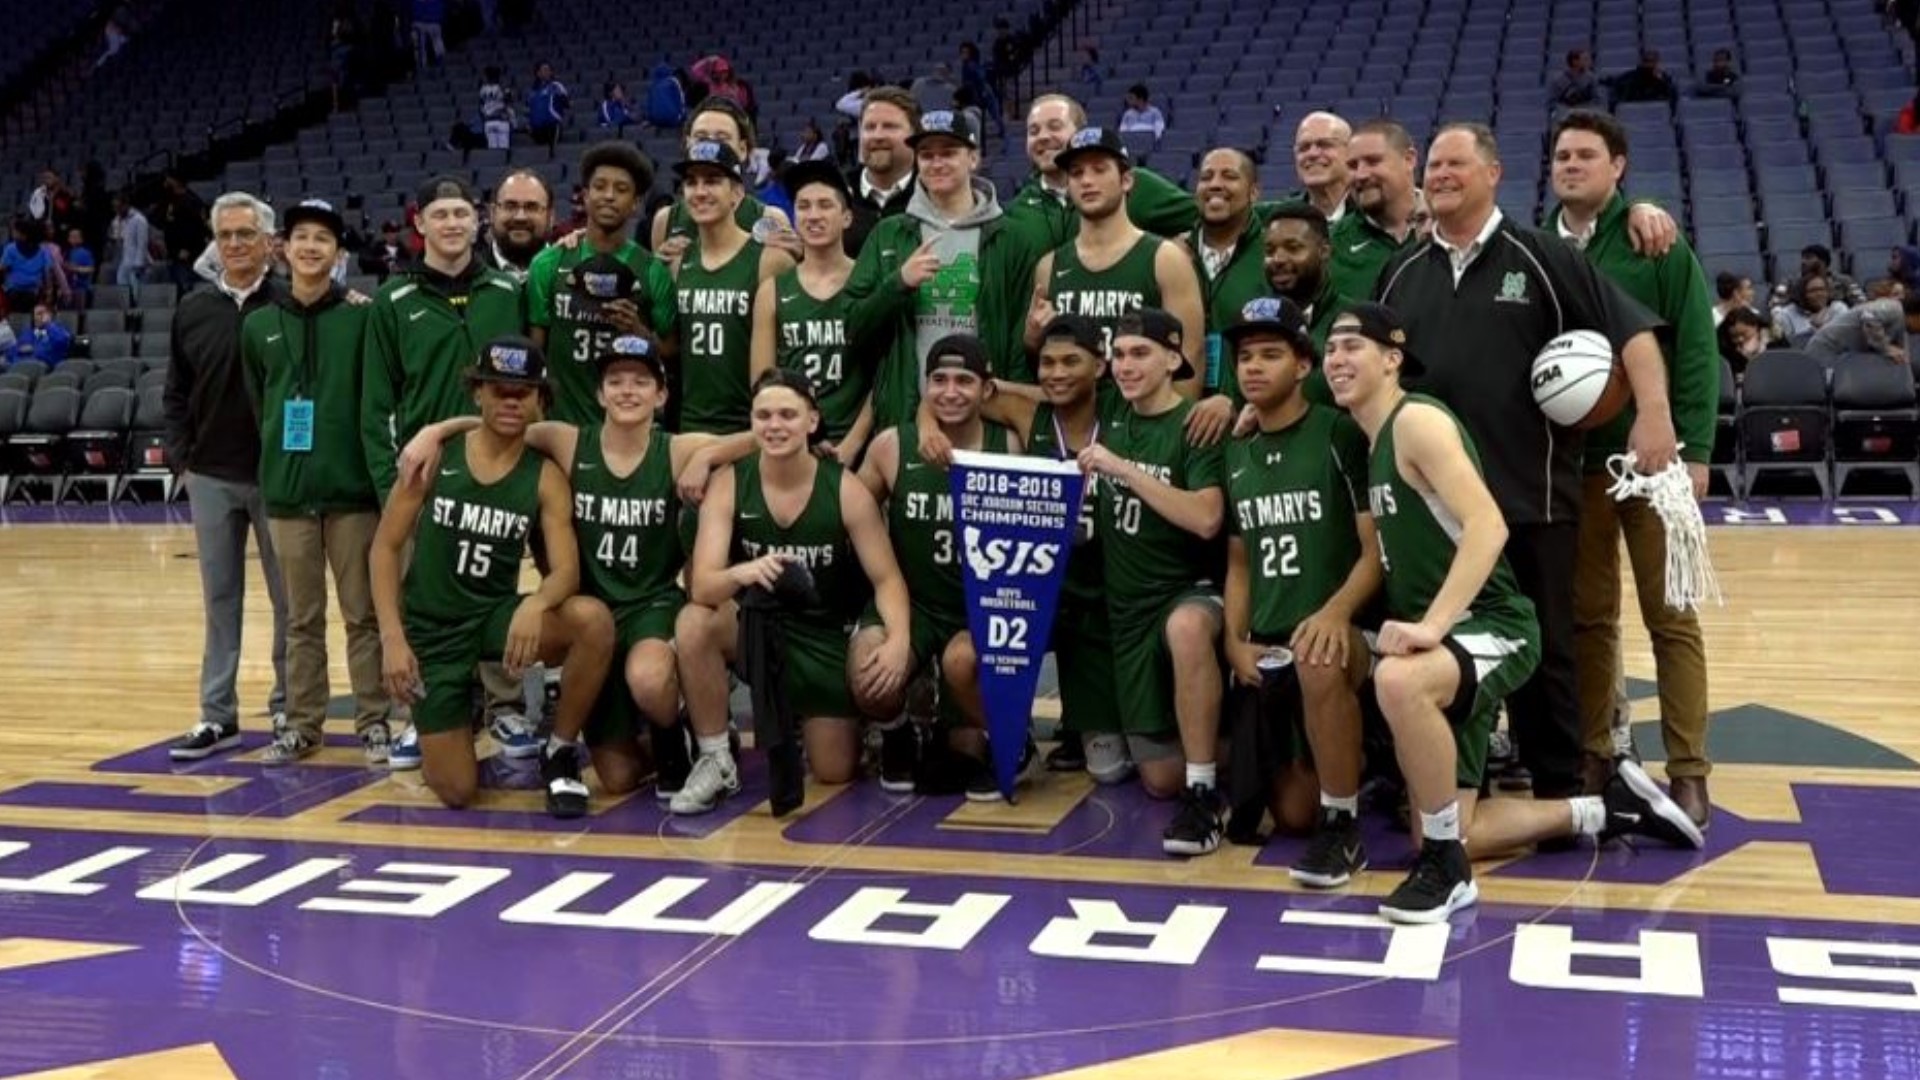 In a repeat of last year's Sac-Joaquin Boys Division II Section Championship, the St. Mary's Rams of Stockton edged the top-seeded Grant Pacers 59-58 to win the title for the second straight season on Friday night at Golden 1 Center.